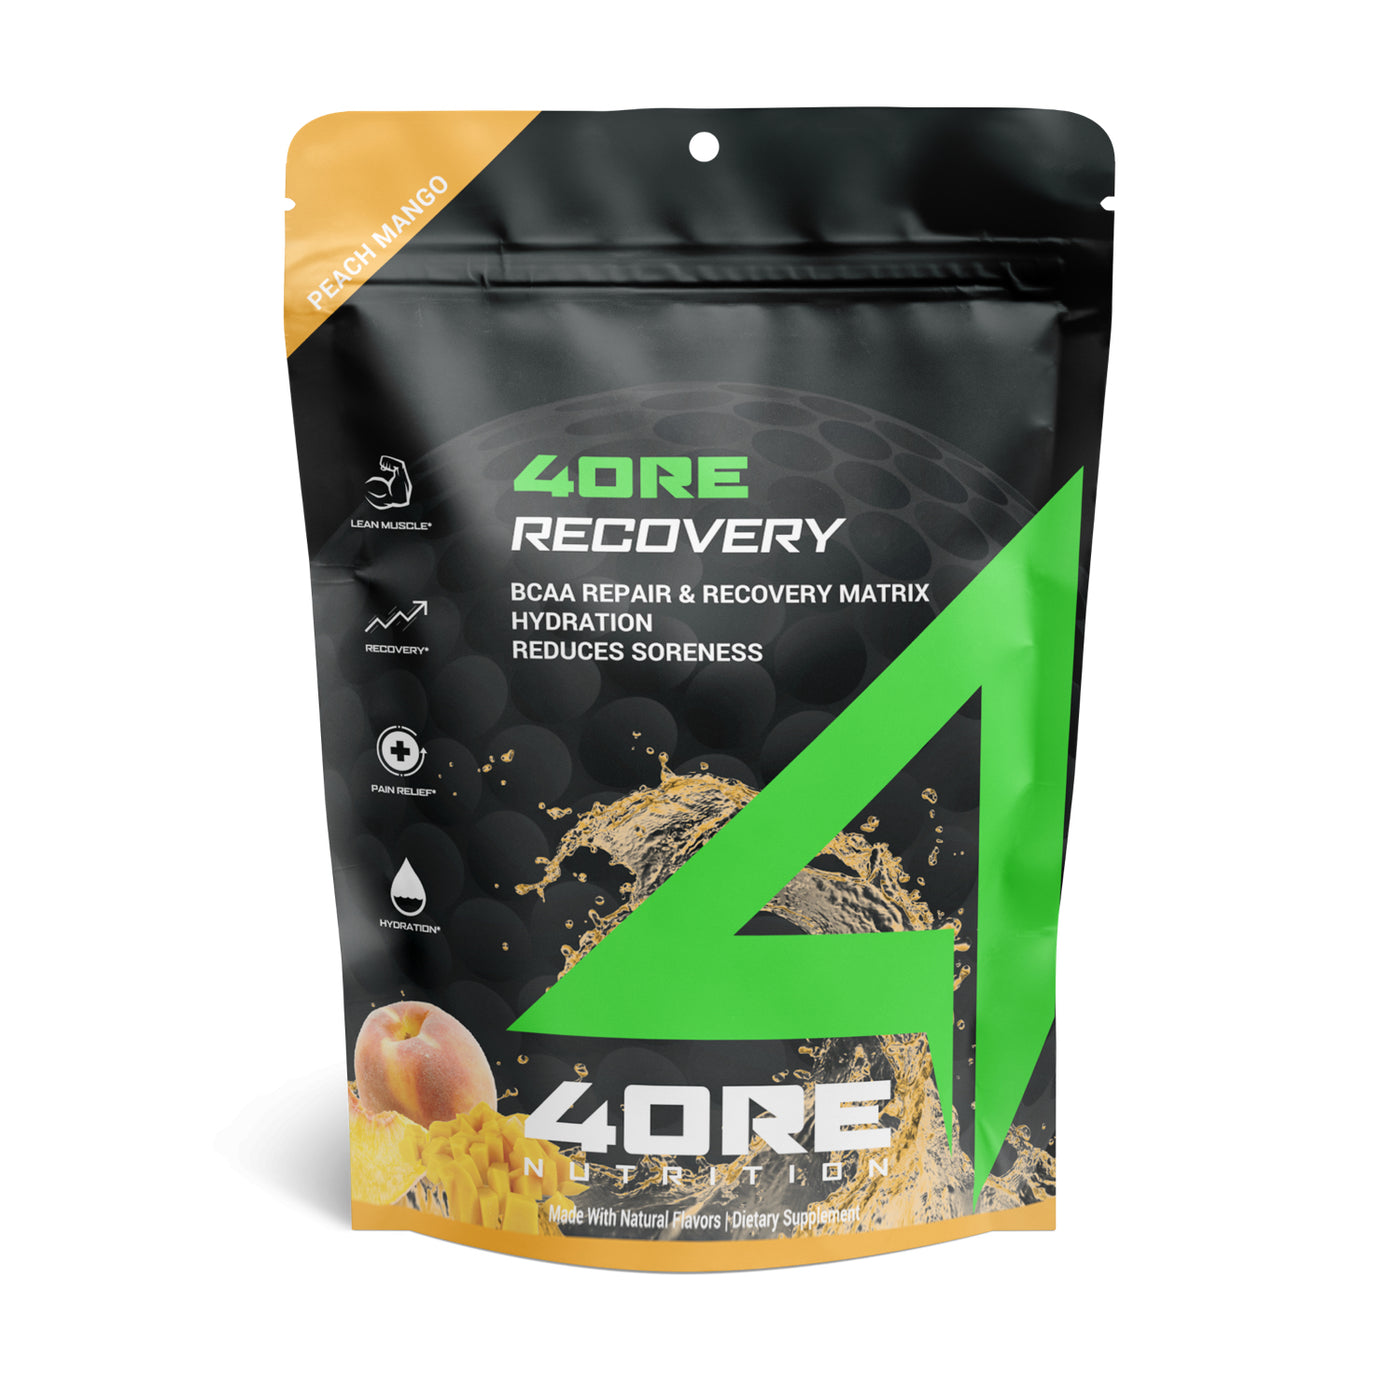 4ORE RECOVERY - 4ORE NUTRITION 4ORE RECOVERY Peach Mango 20 Serving Pouch